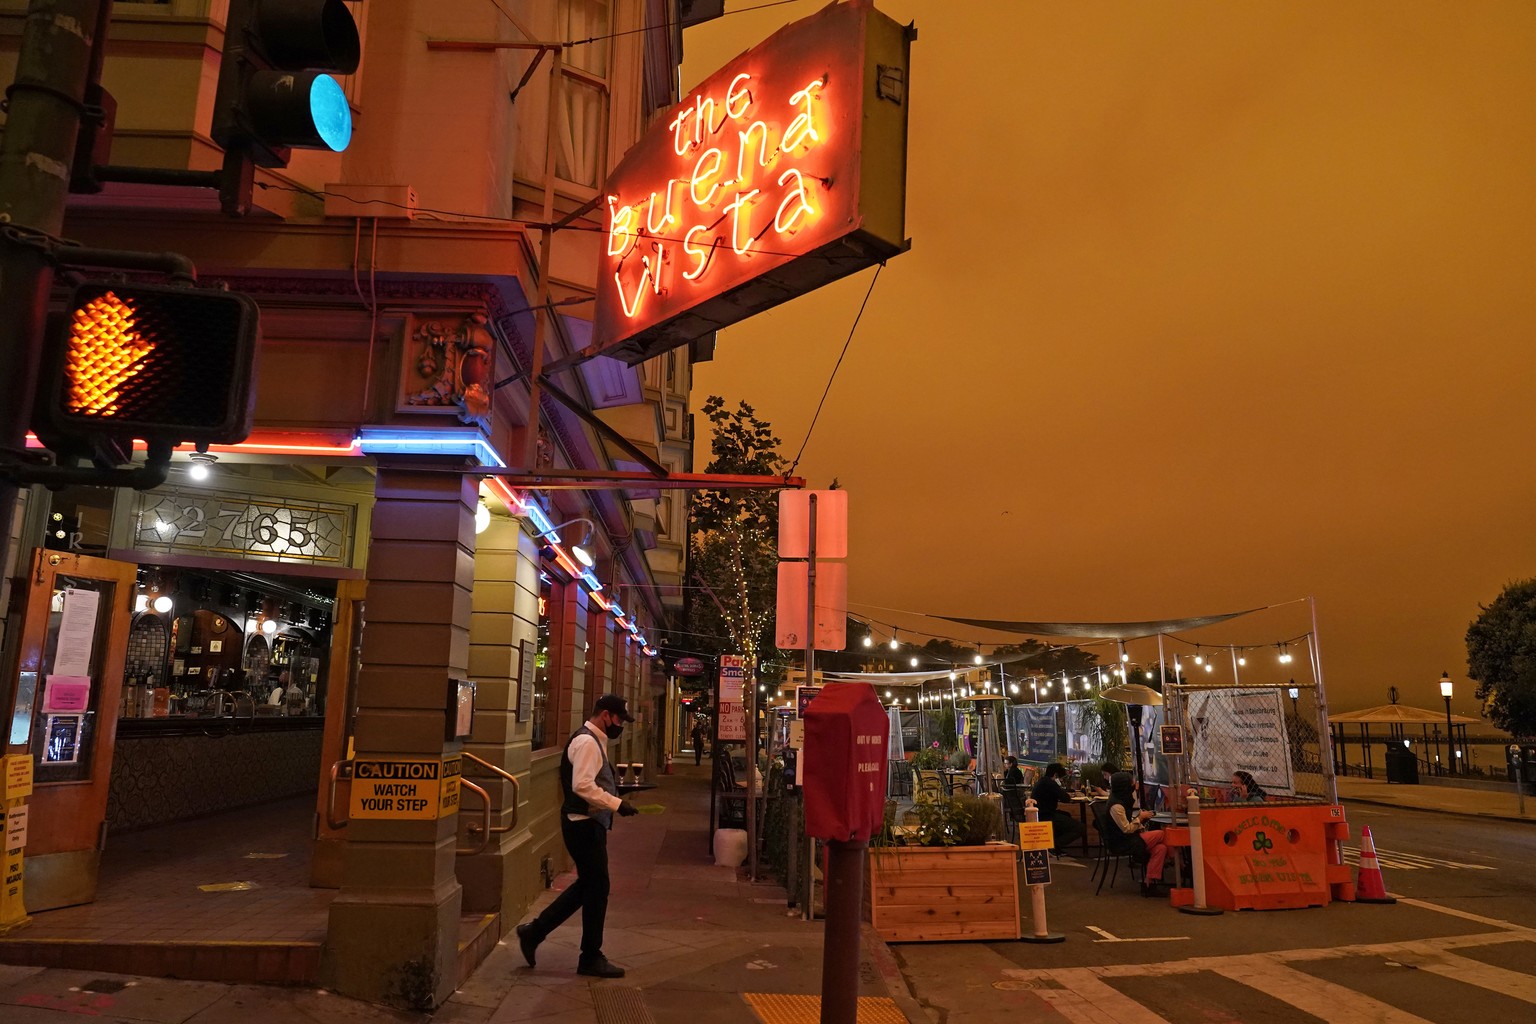 Under darkened skies from wildfire smoke, a waiter carries a tray of Irish Coffee to people having lunch at the Buena Vista Cafe Wednesday, Sept. 9, 2020, in San Francisco. People from San Francisco t ...